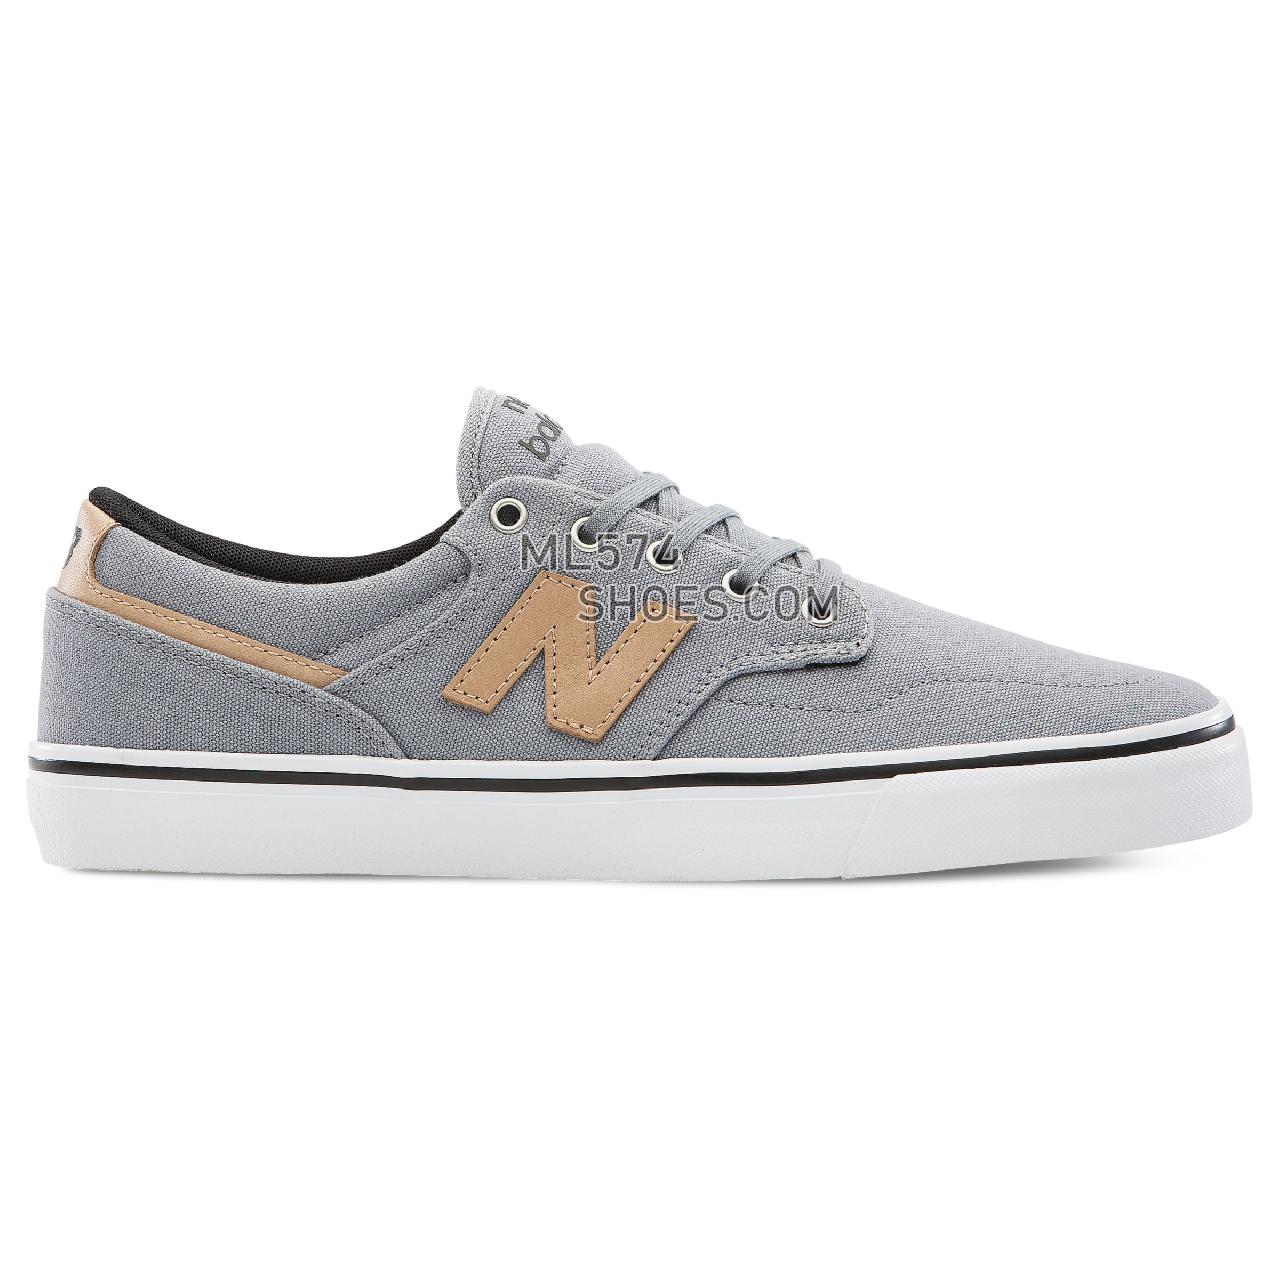 New Balance 331 - Men's 331 - Classic Grey with White and Tan - AM331GGA